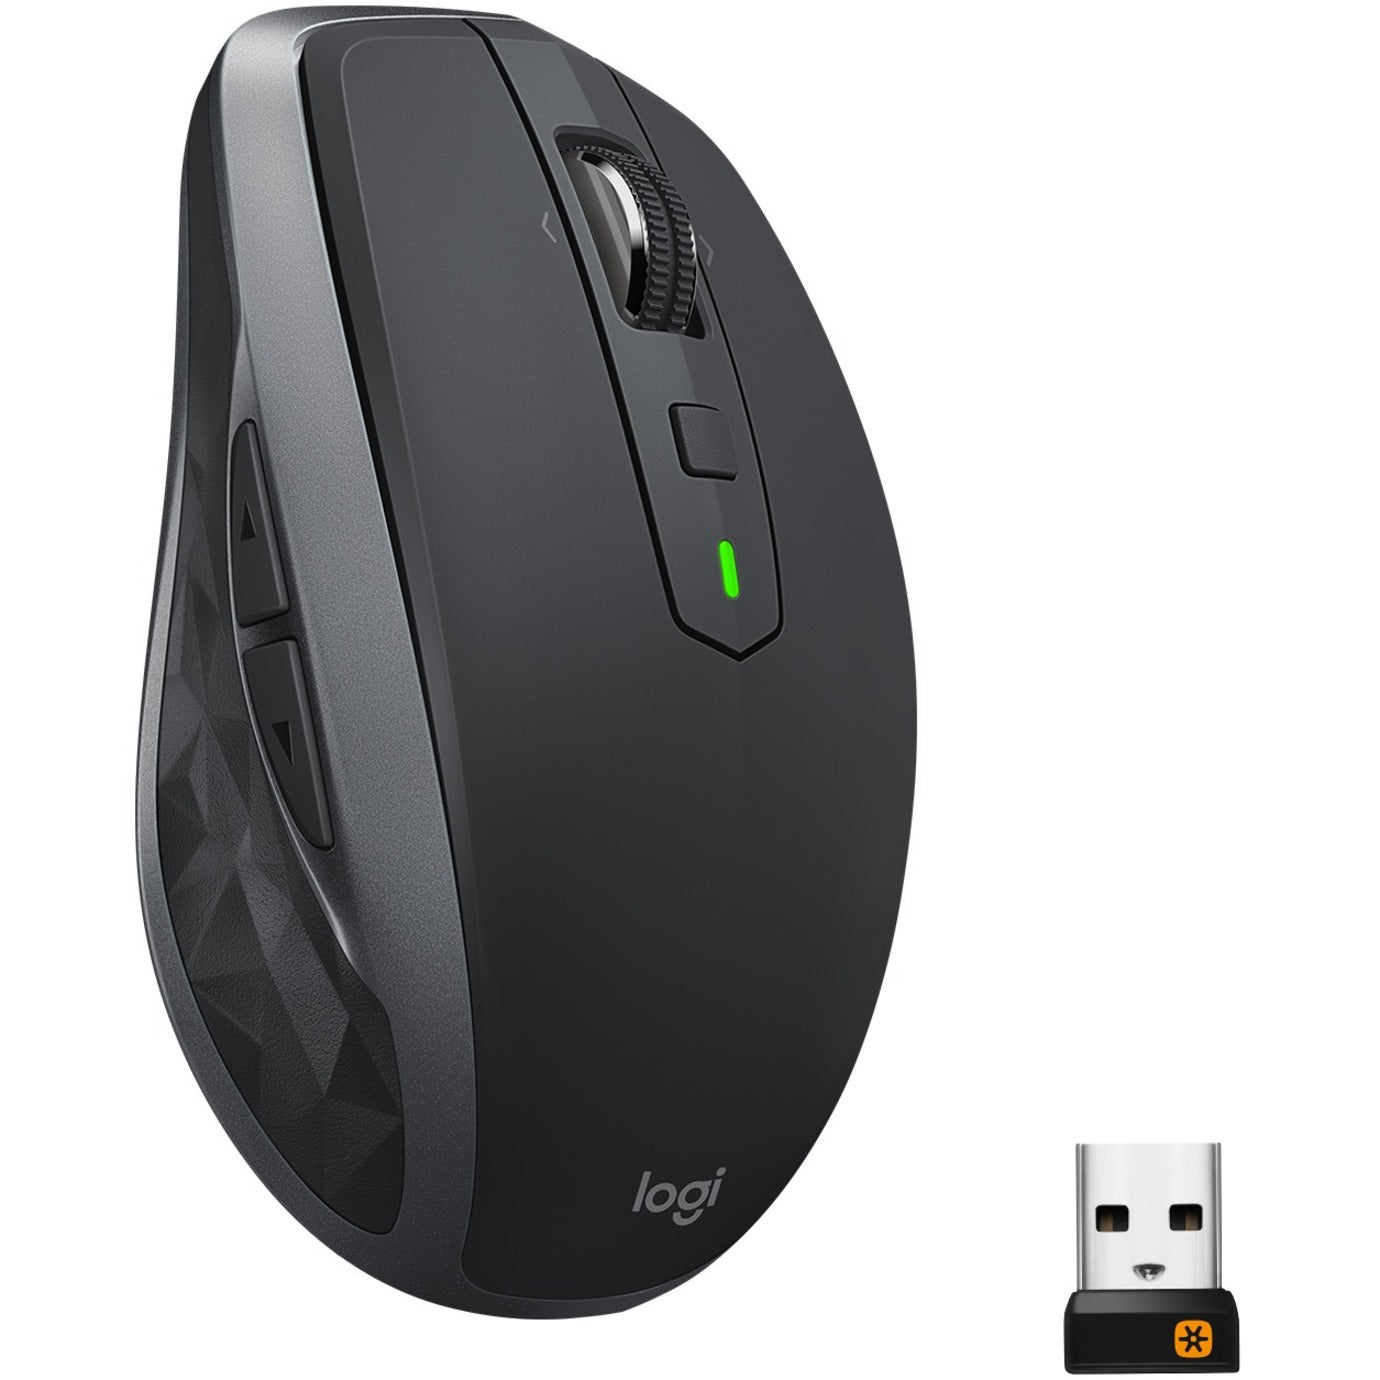 Logitech 910-006210 MX Anywhere 2S Mouse, Wireless Mobile Mouse with Darkfield Technology, 4000 DPI, Rechargeable, USB Interface